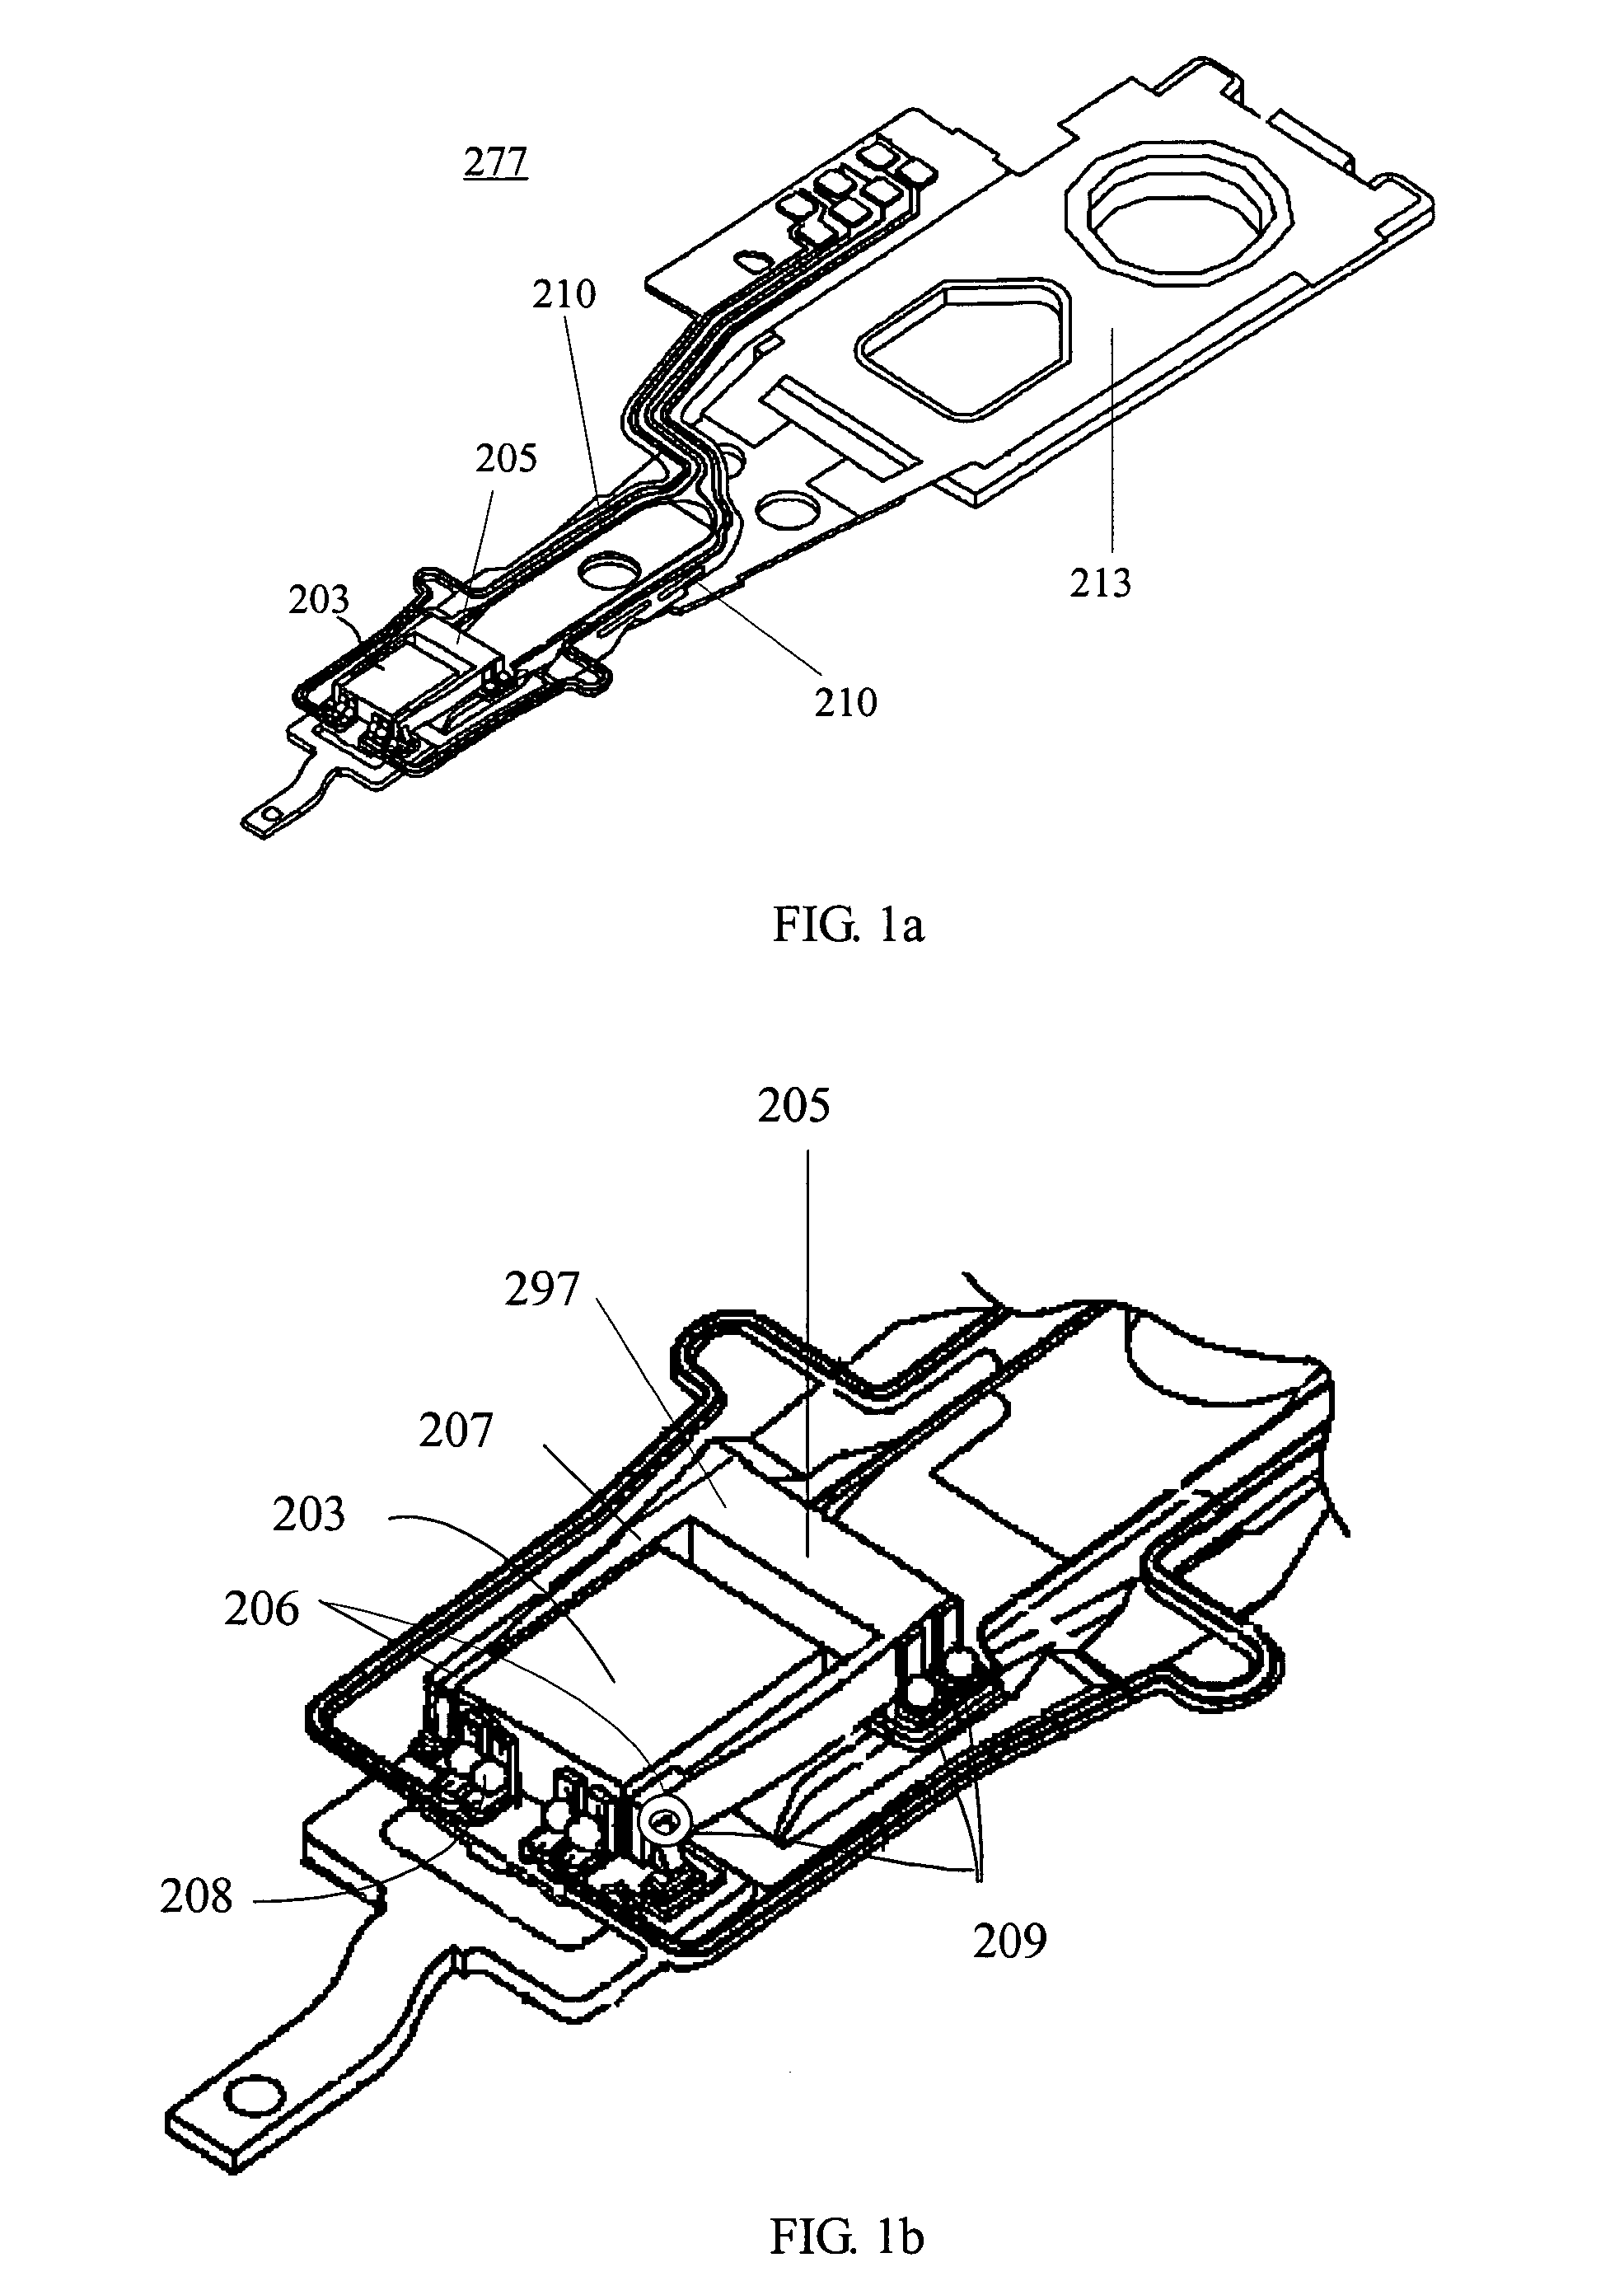 Micro-actuator unit, head gimbal assembly, and disk drive unit with vibration canceller